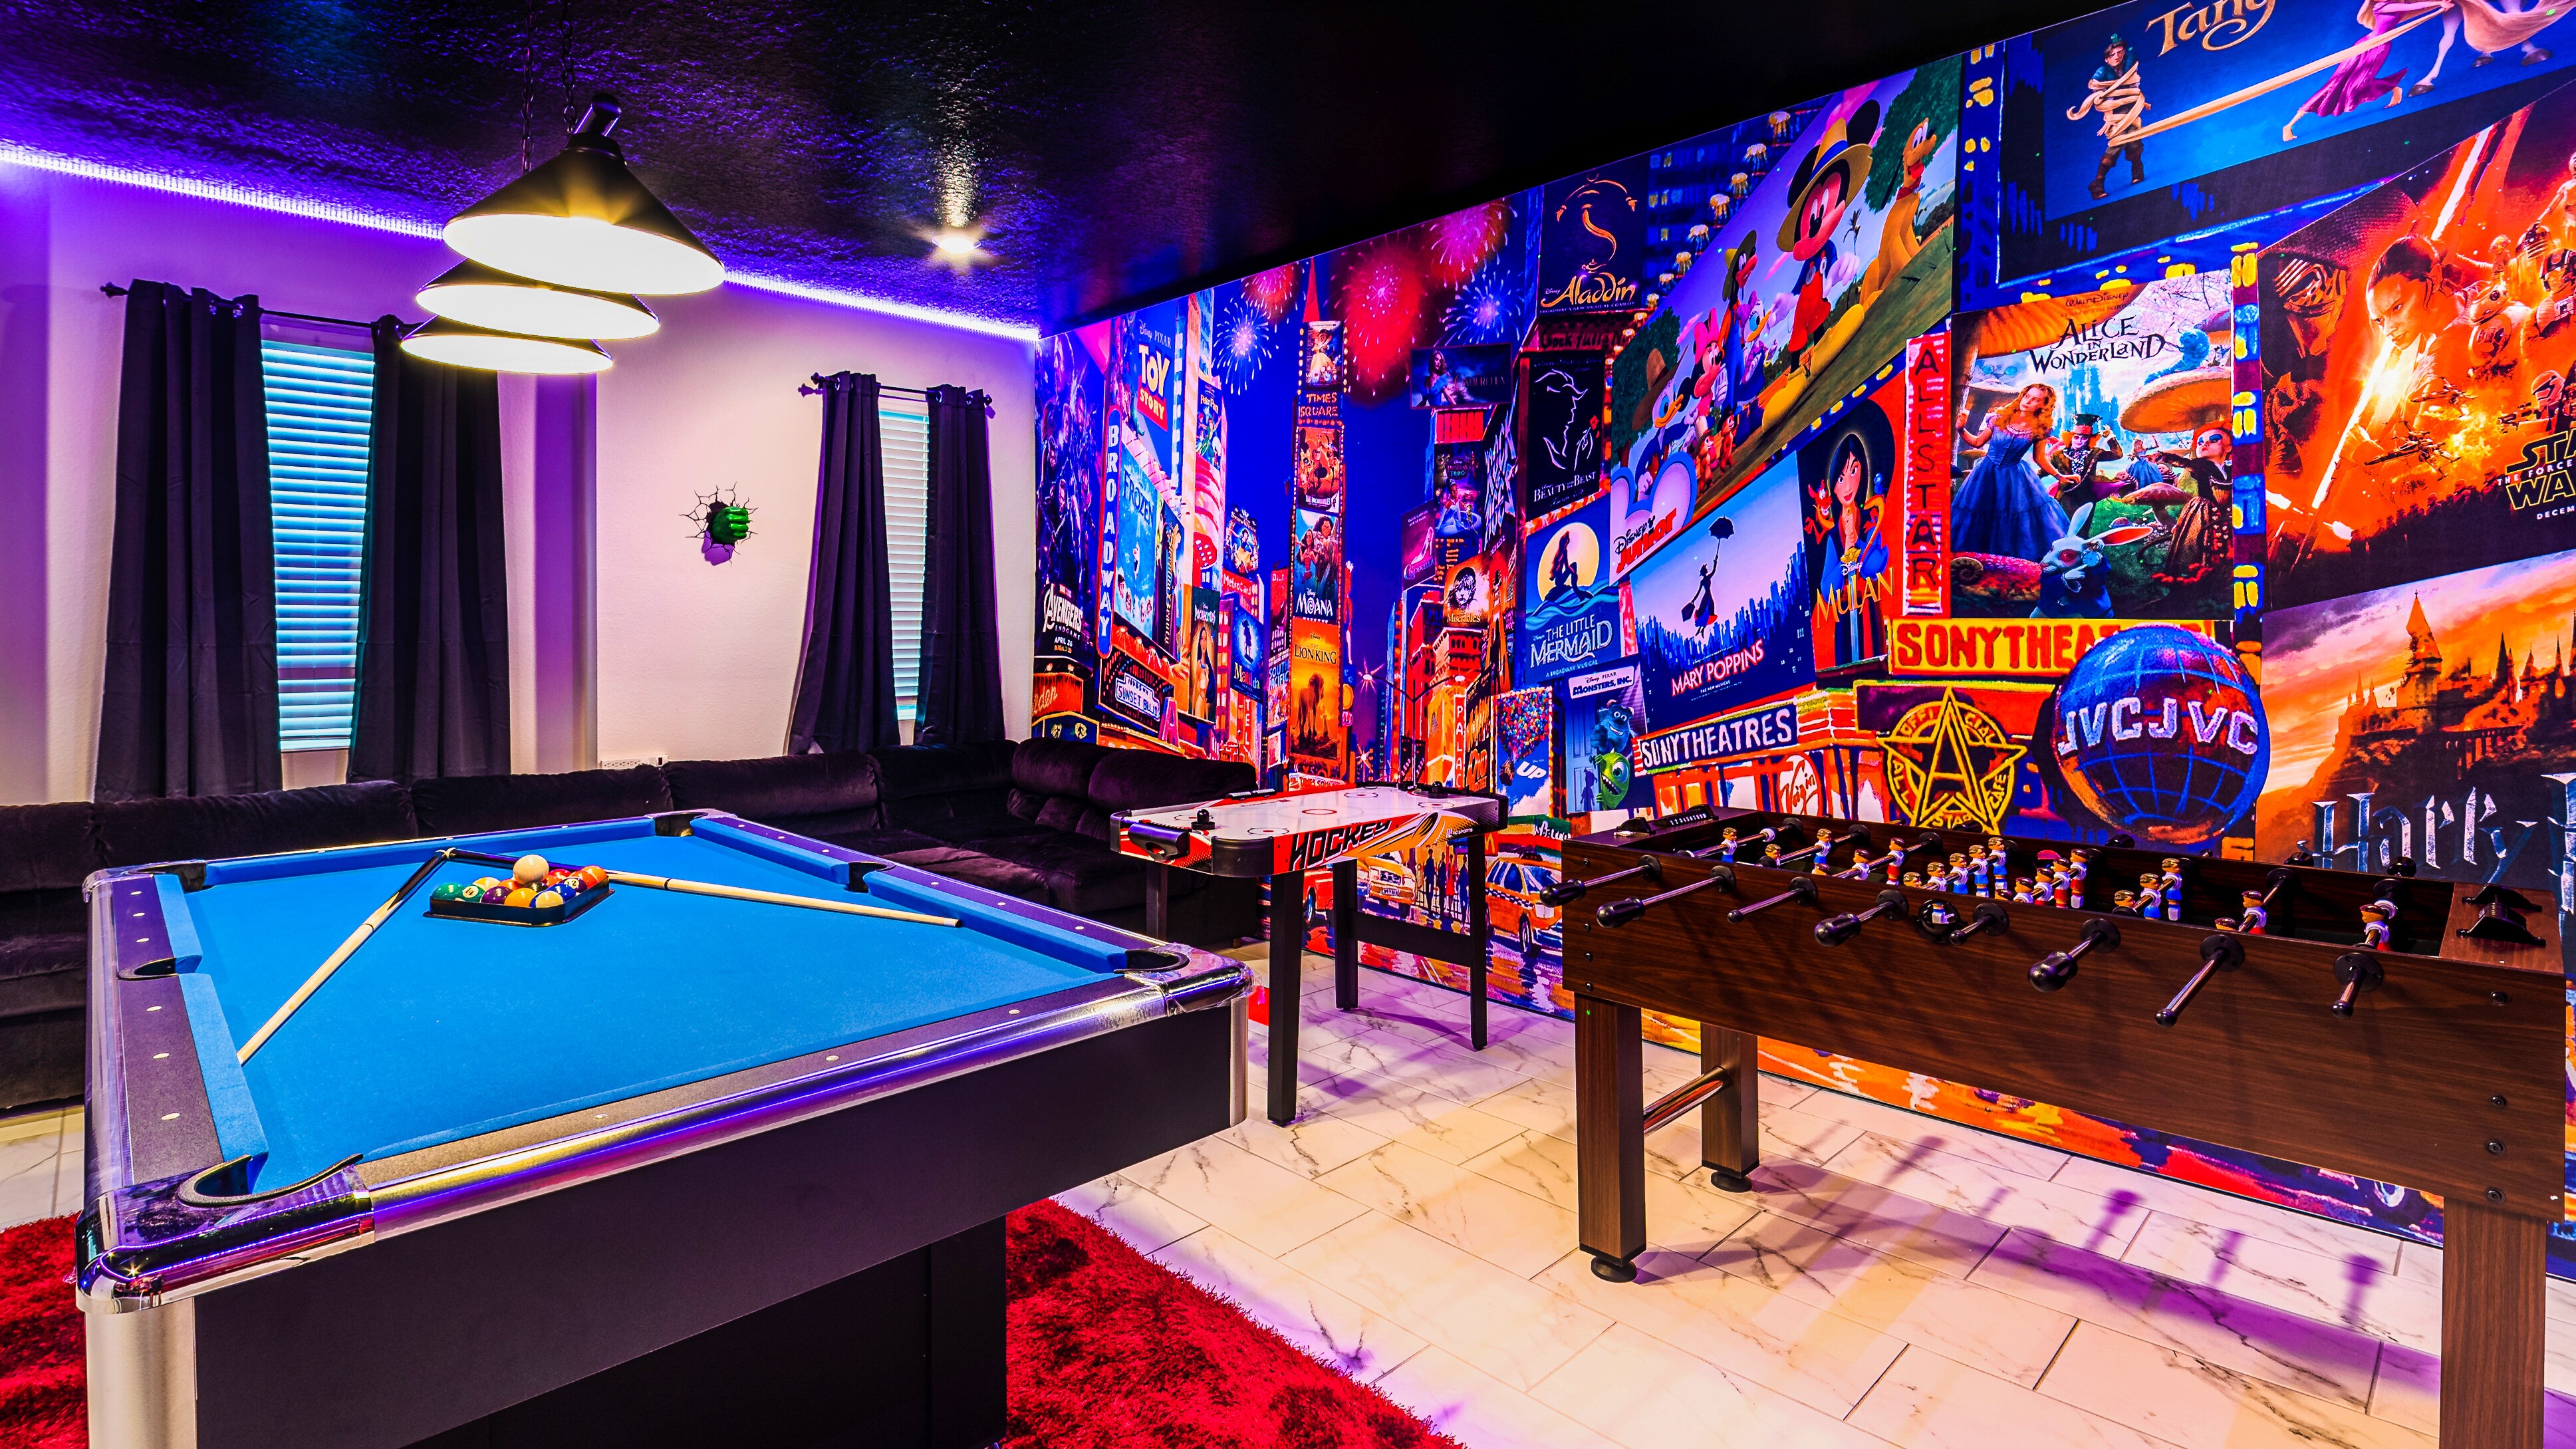 Transform your leisure space into a dynamic playroom with the inclusion of both a pool table and foosball, offering diverse gaming options.